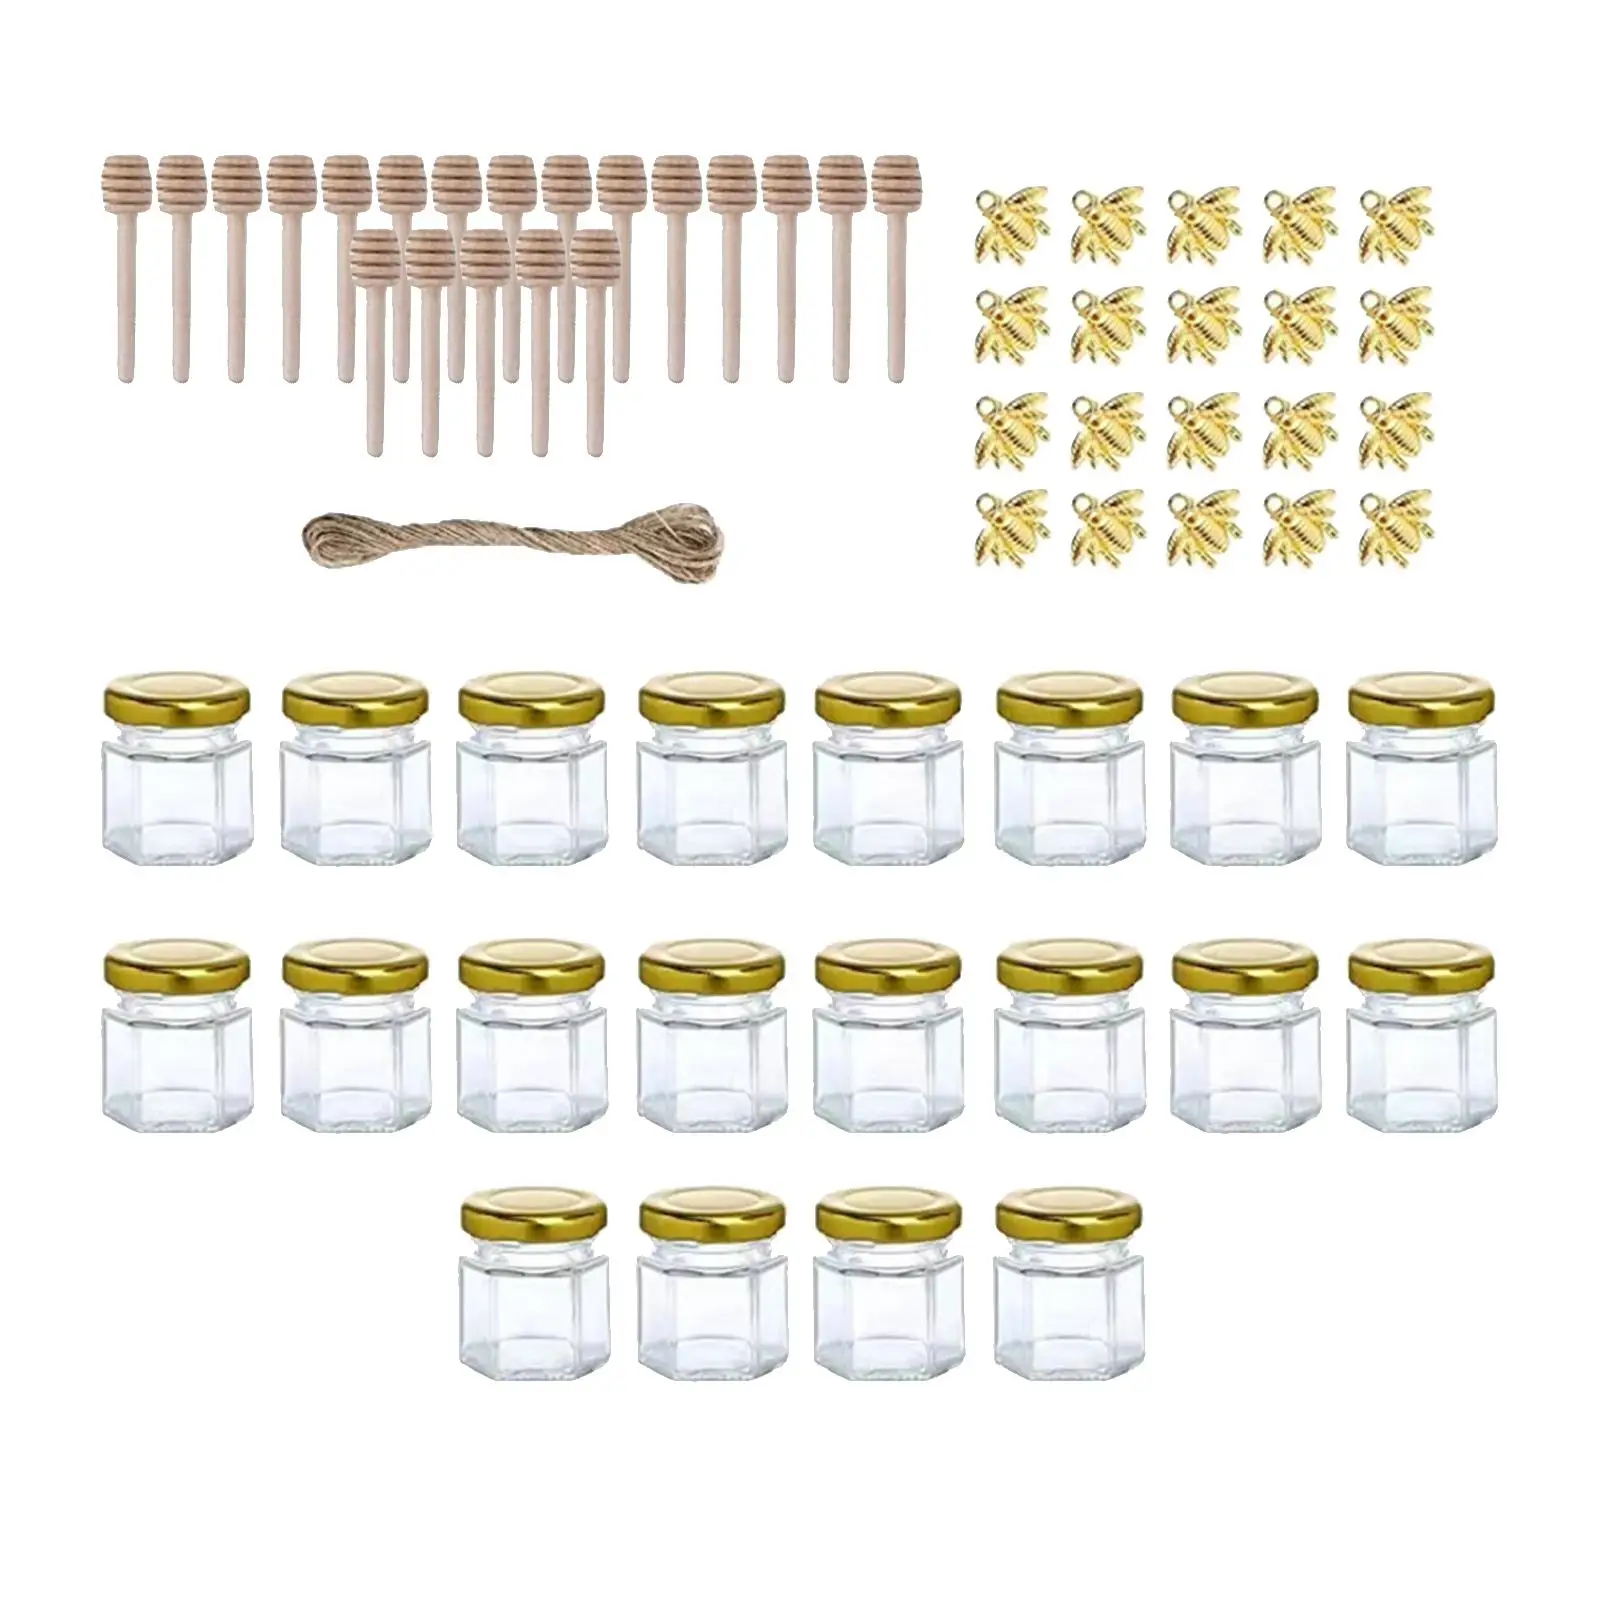 20x Small Glass Jars Screw Lids Kitchen Storage Jars 1.5oz for Wedding Party Favors DIY Gift Candle Making Liquids Honey